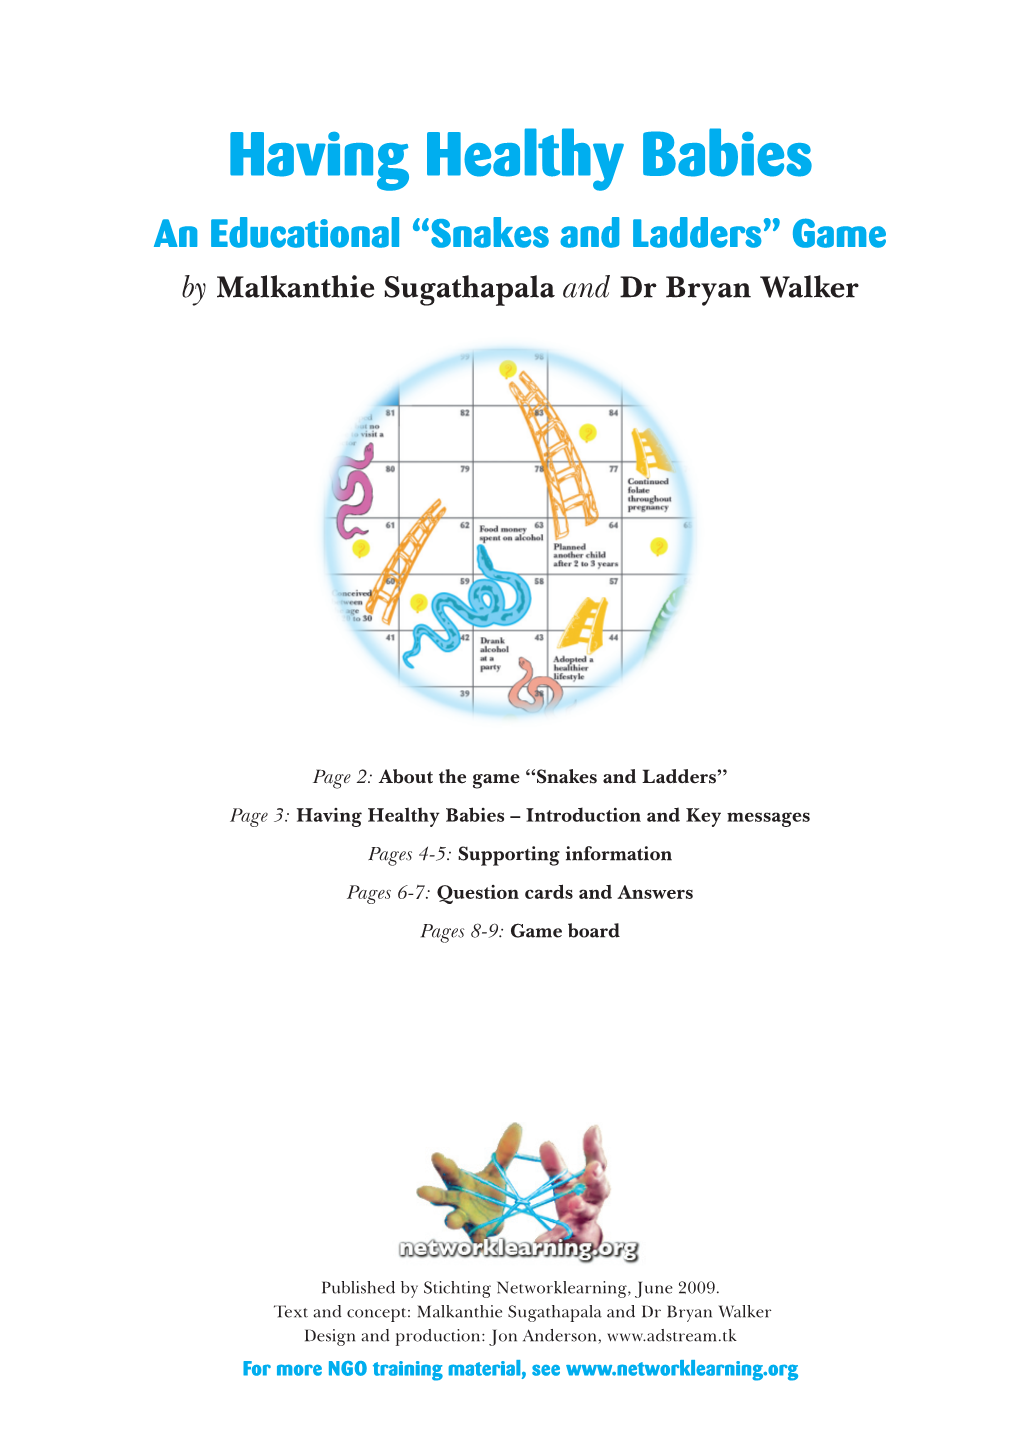 Having Healthy Babies an Educational “Snakes and Ladders” Game by Malkanthie Sugathapala and Dr Bryan Walker